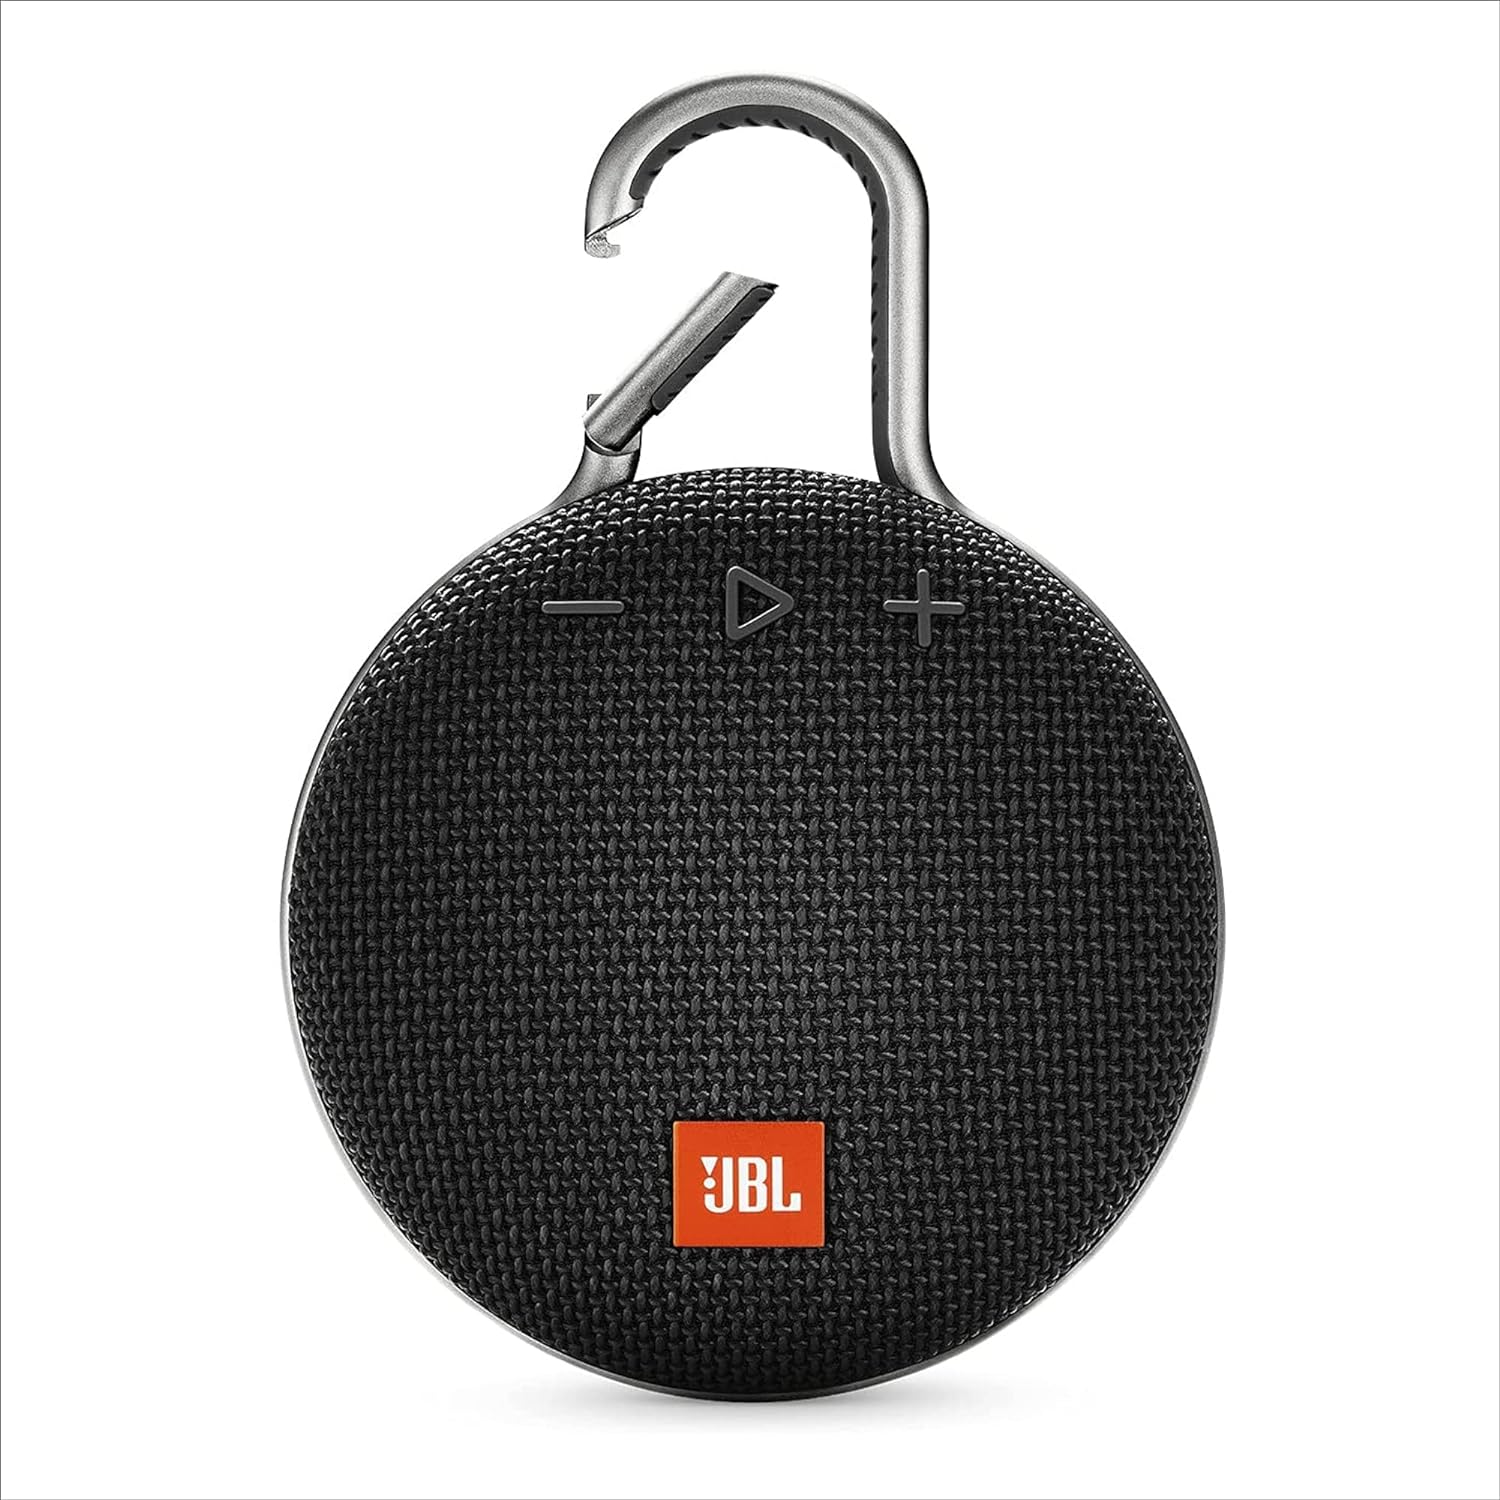 Best JBL Portable Speaker: Top 5 Picks for Exceptional Sound On-The-Go